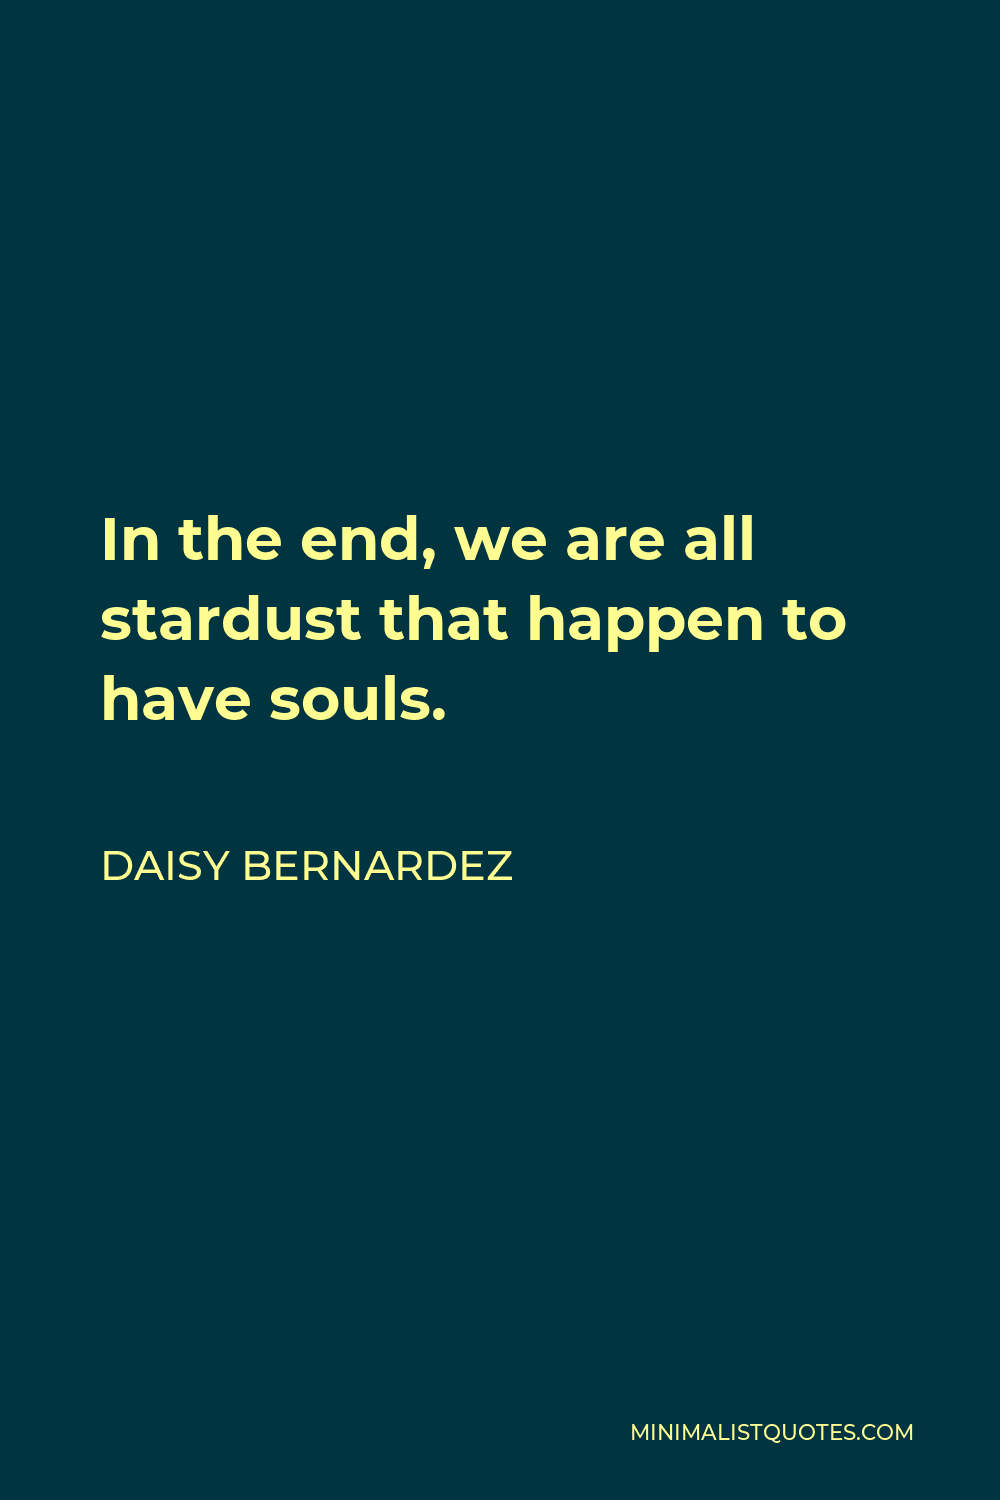 Daisy Bernardez Quote - In the end, we are all stardust that happen to have souls.